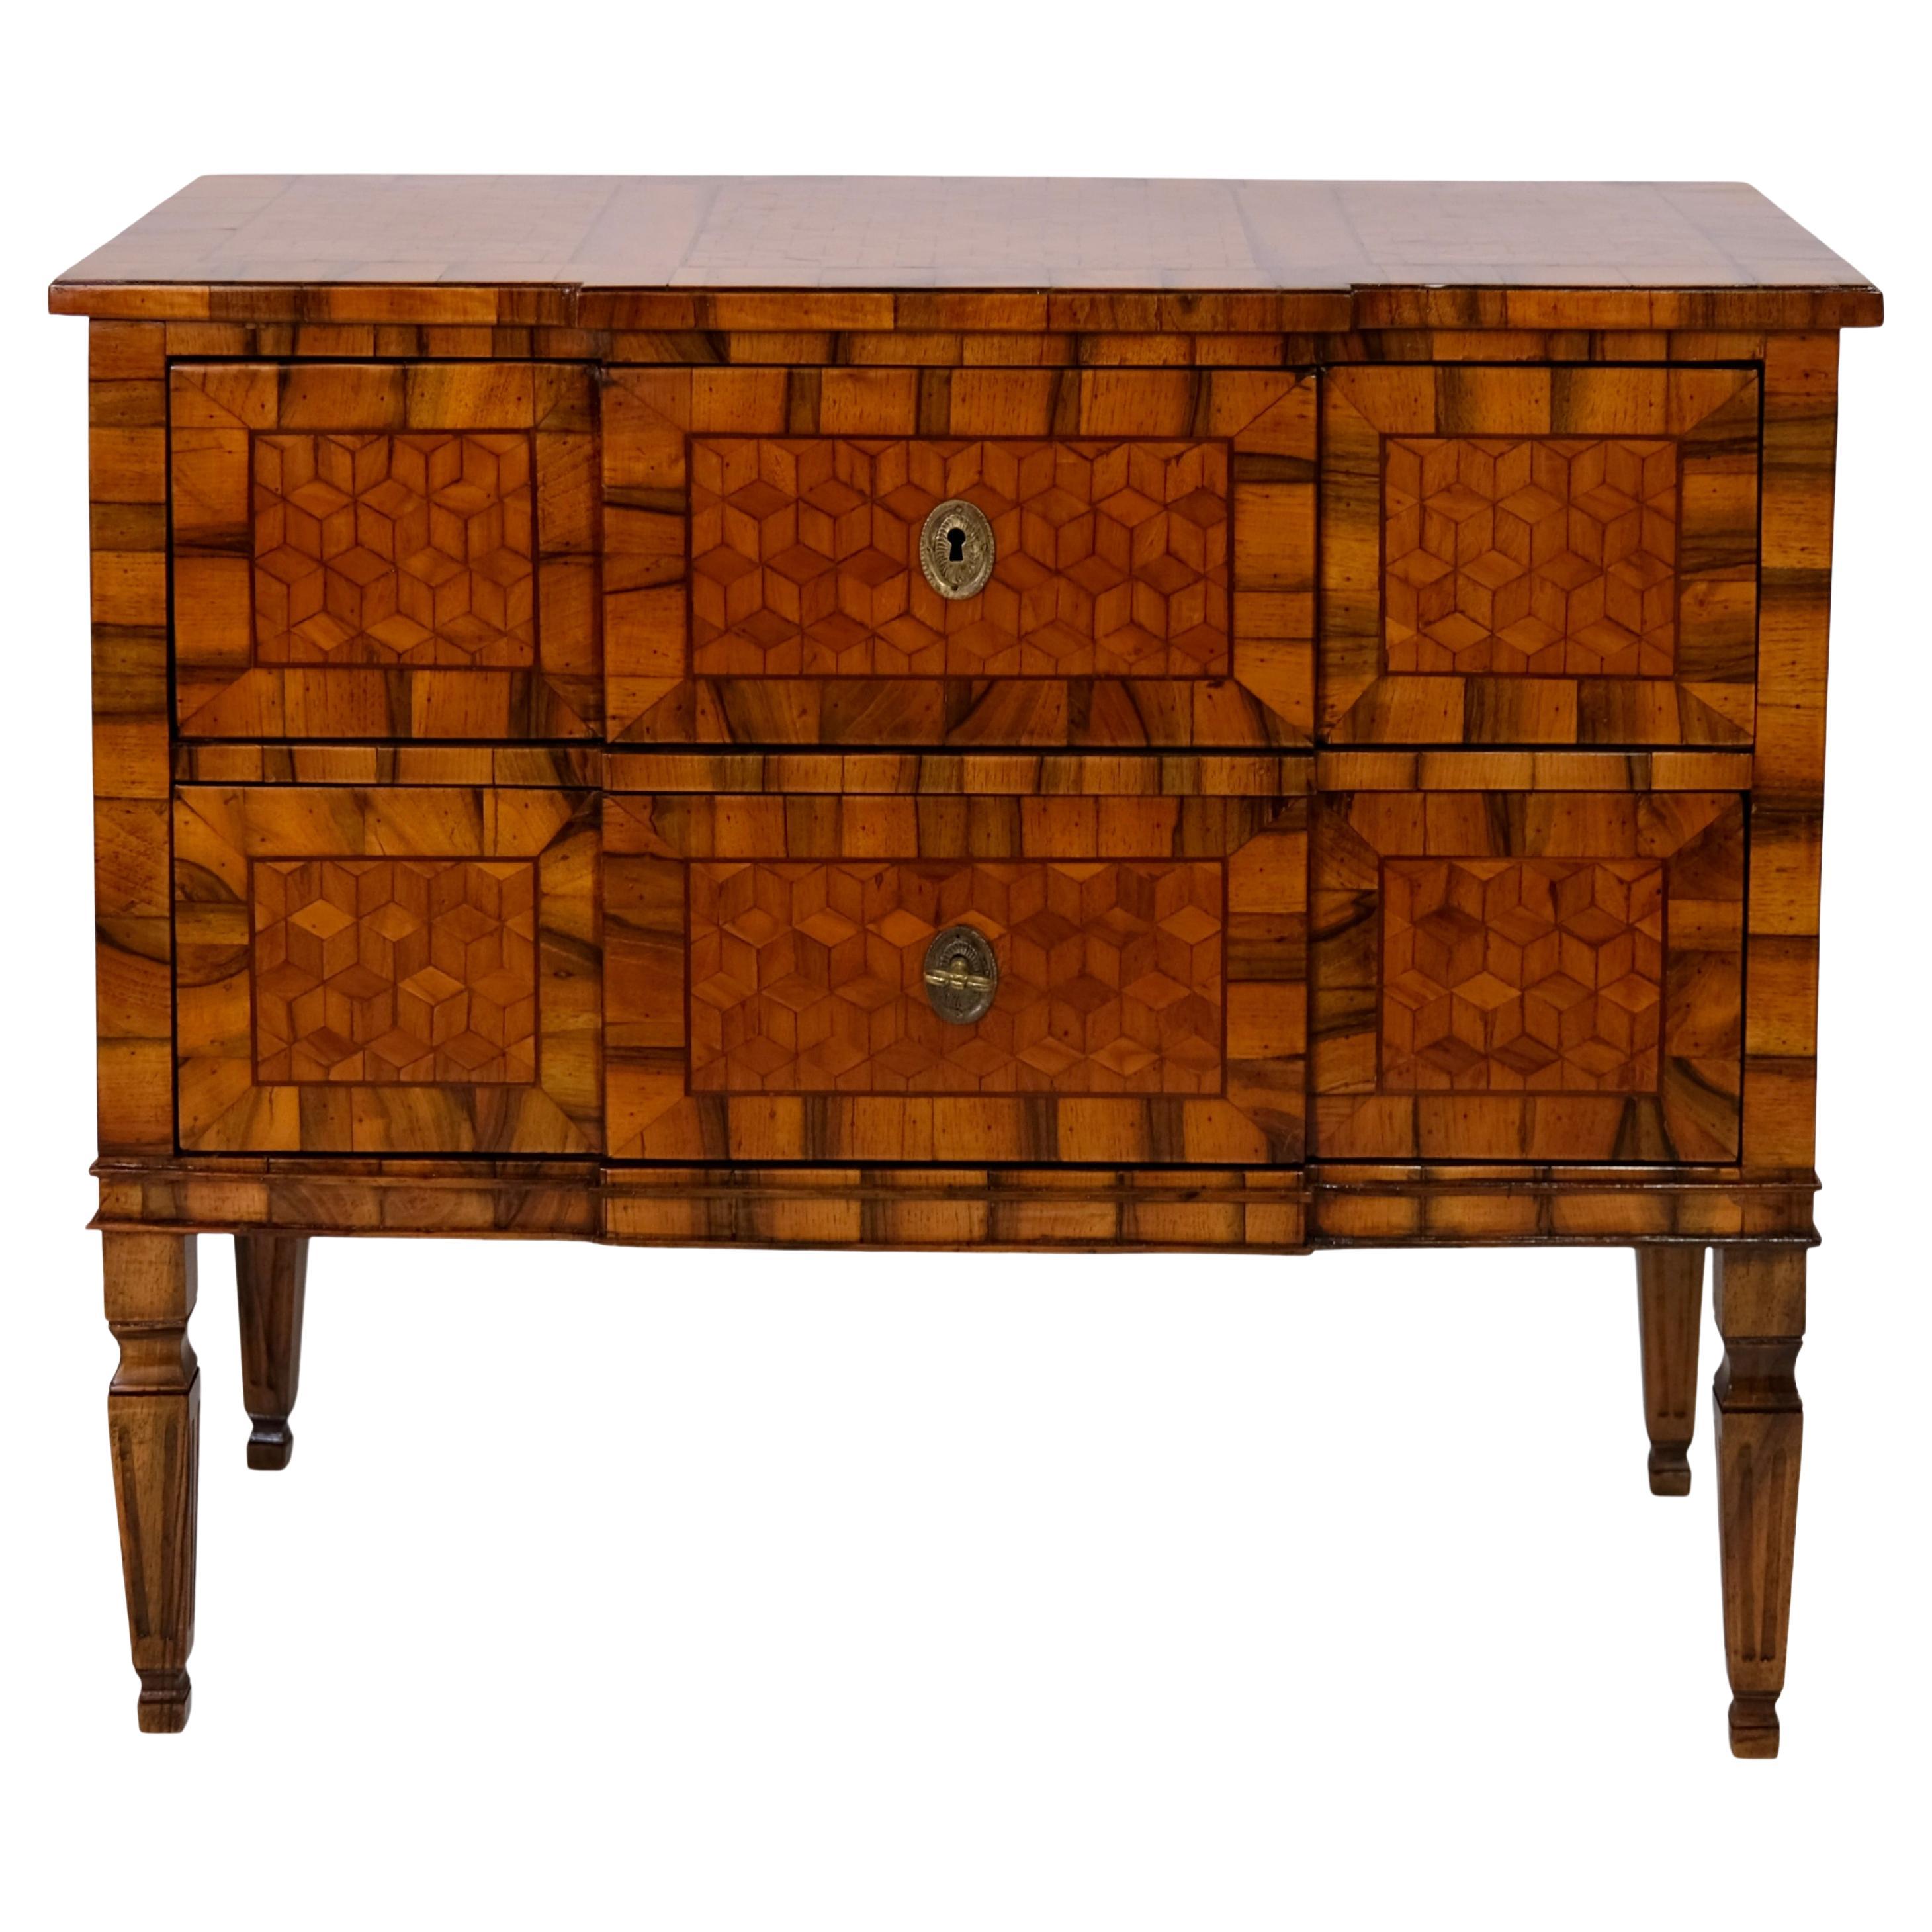 Handpolished 1830s Louis Seize XVI Style Chest of Drawers in Nutwood